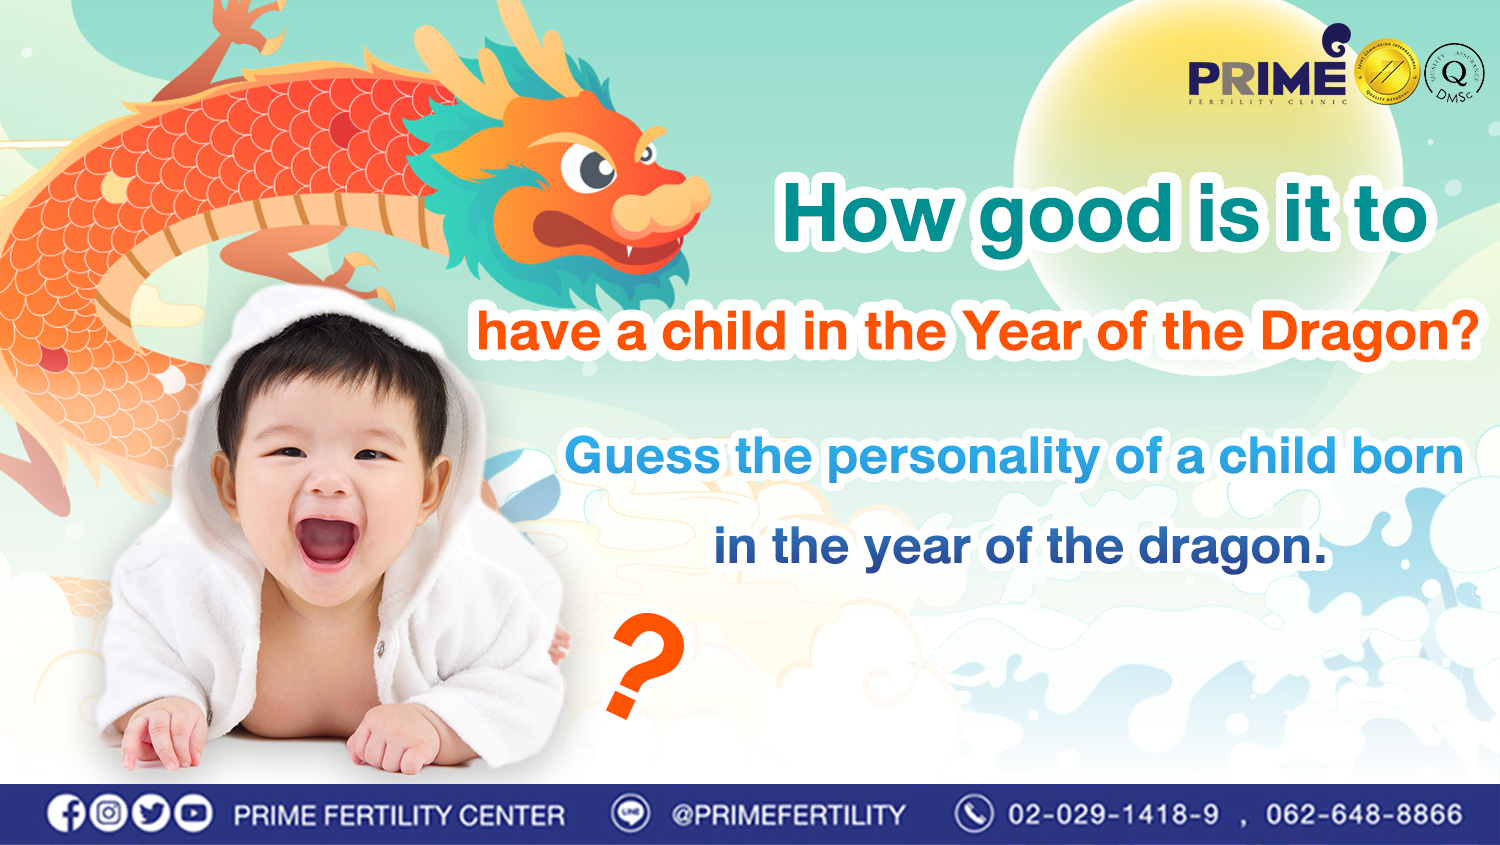 How good is it to have a child in the Year of the Dragon? 